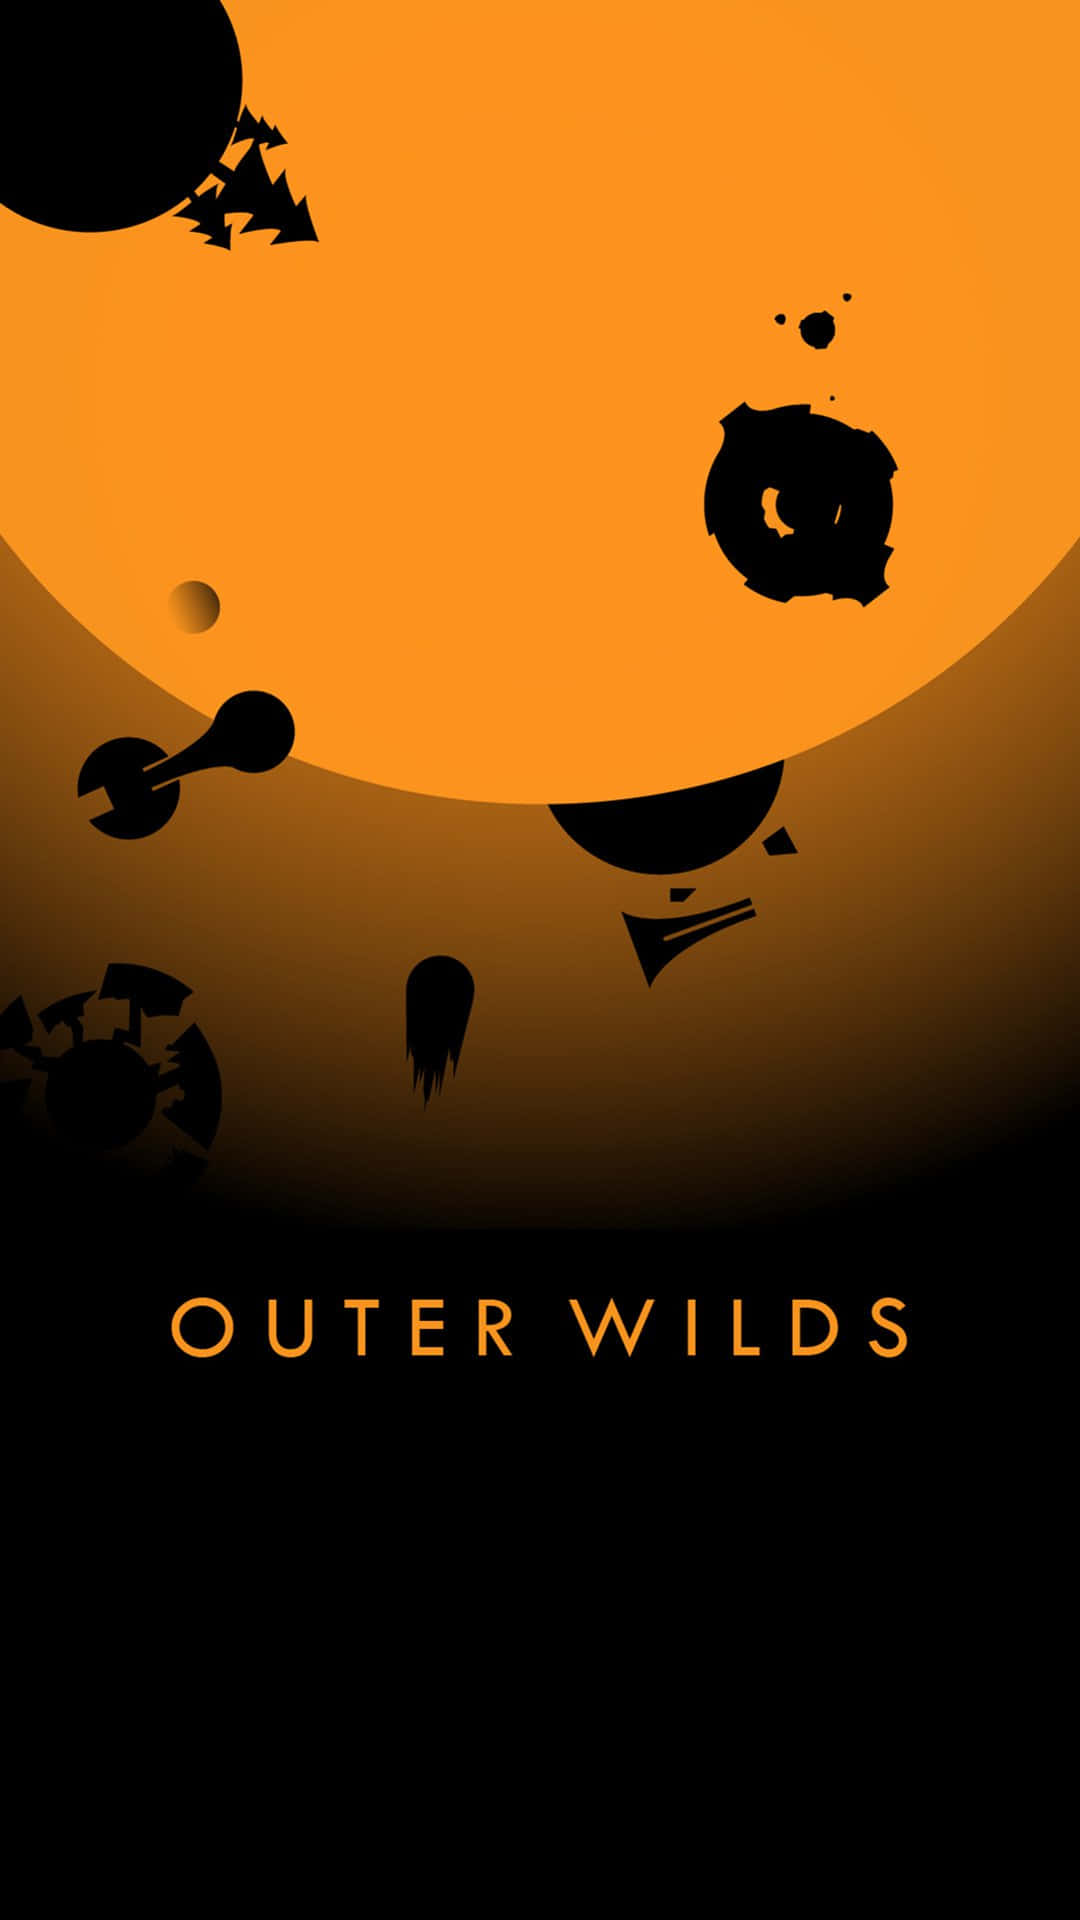 Orange And Black Outer Wilds Poster Wallpaper